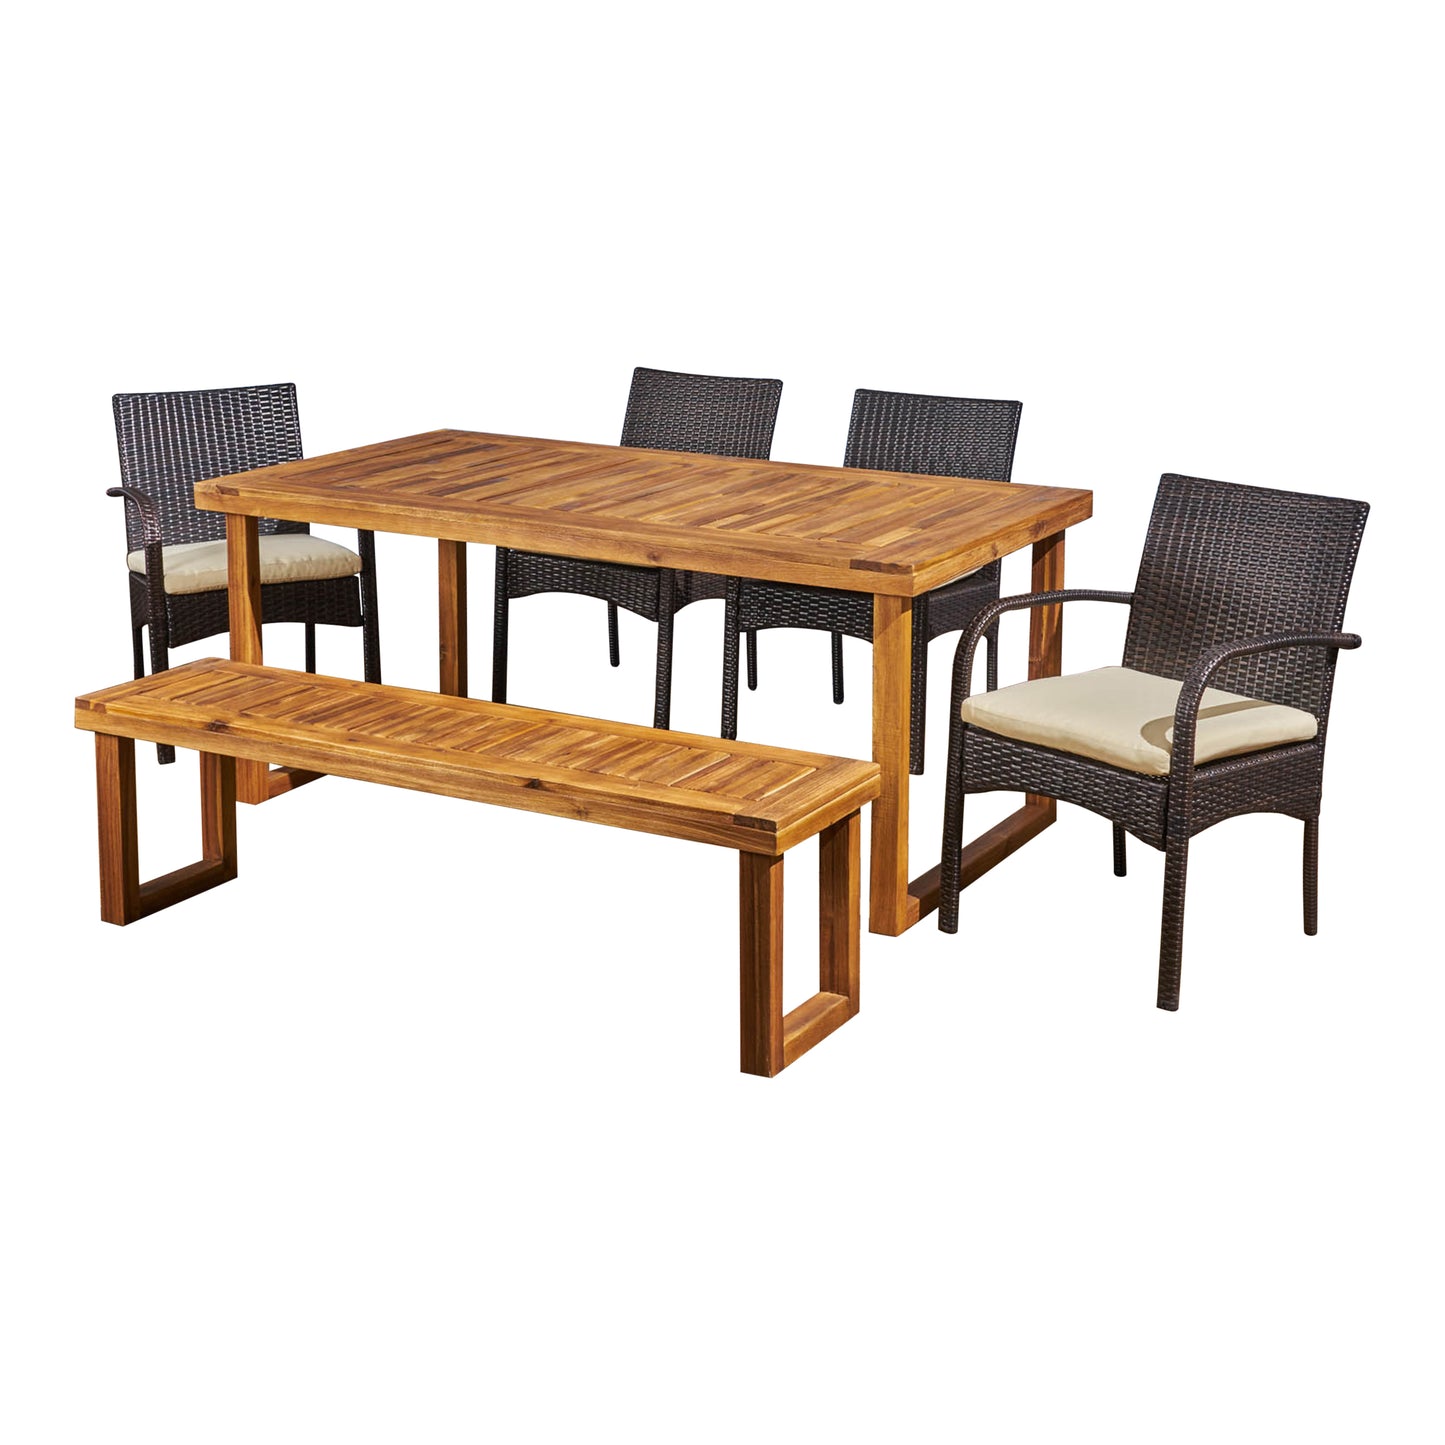 Stonecrest Outdoor 6-Seater Wood and Wicker Chair and Bench Dining Set